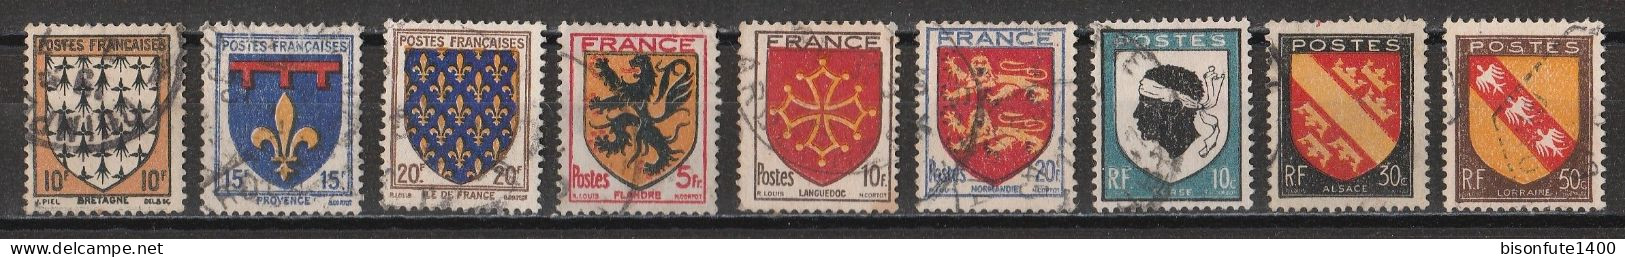 France 1943- ? : Timbres Yvert & Tellier N° 573 - 574 - 575 - 602 - 603 - 605 - 619 - 755 - 756 - 757 - 758 Et .... - Used Stamps